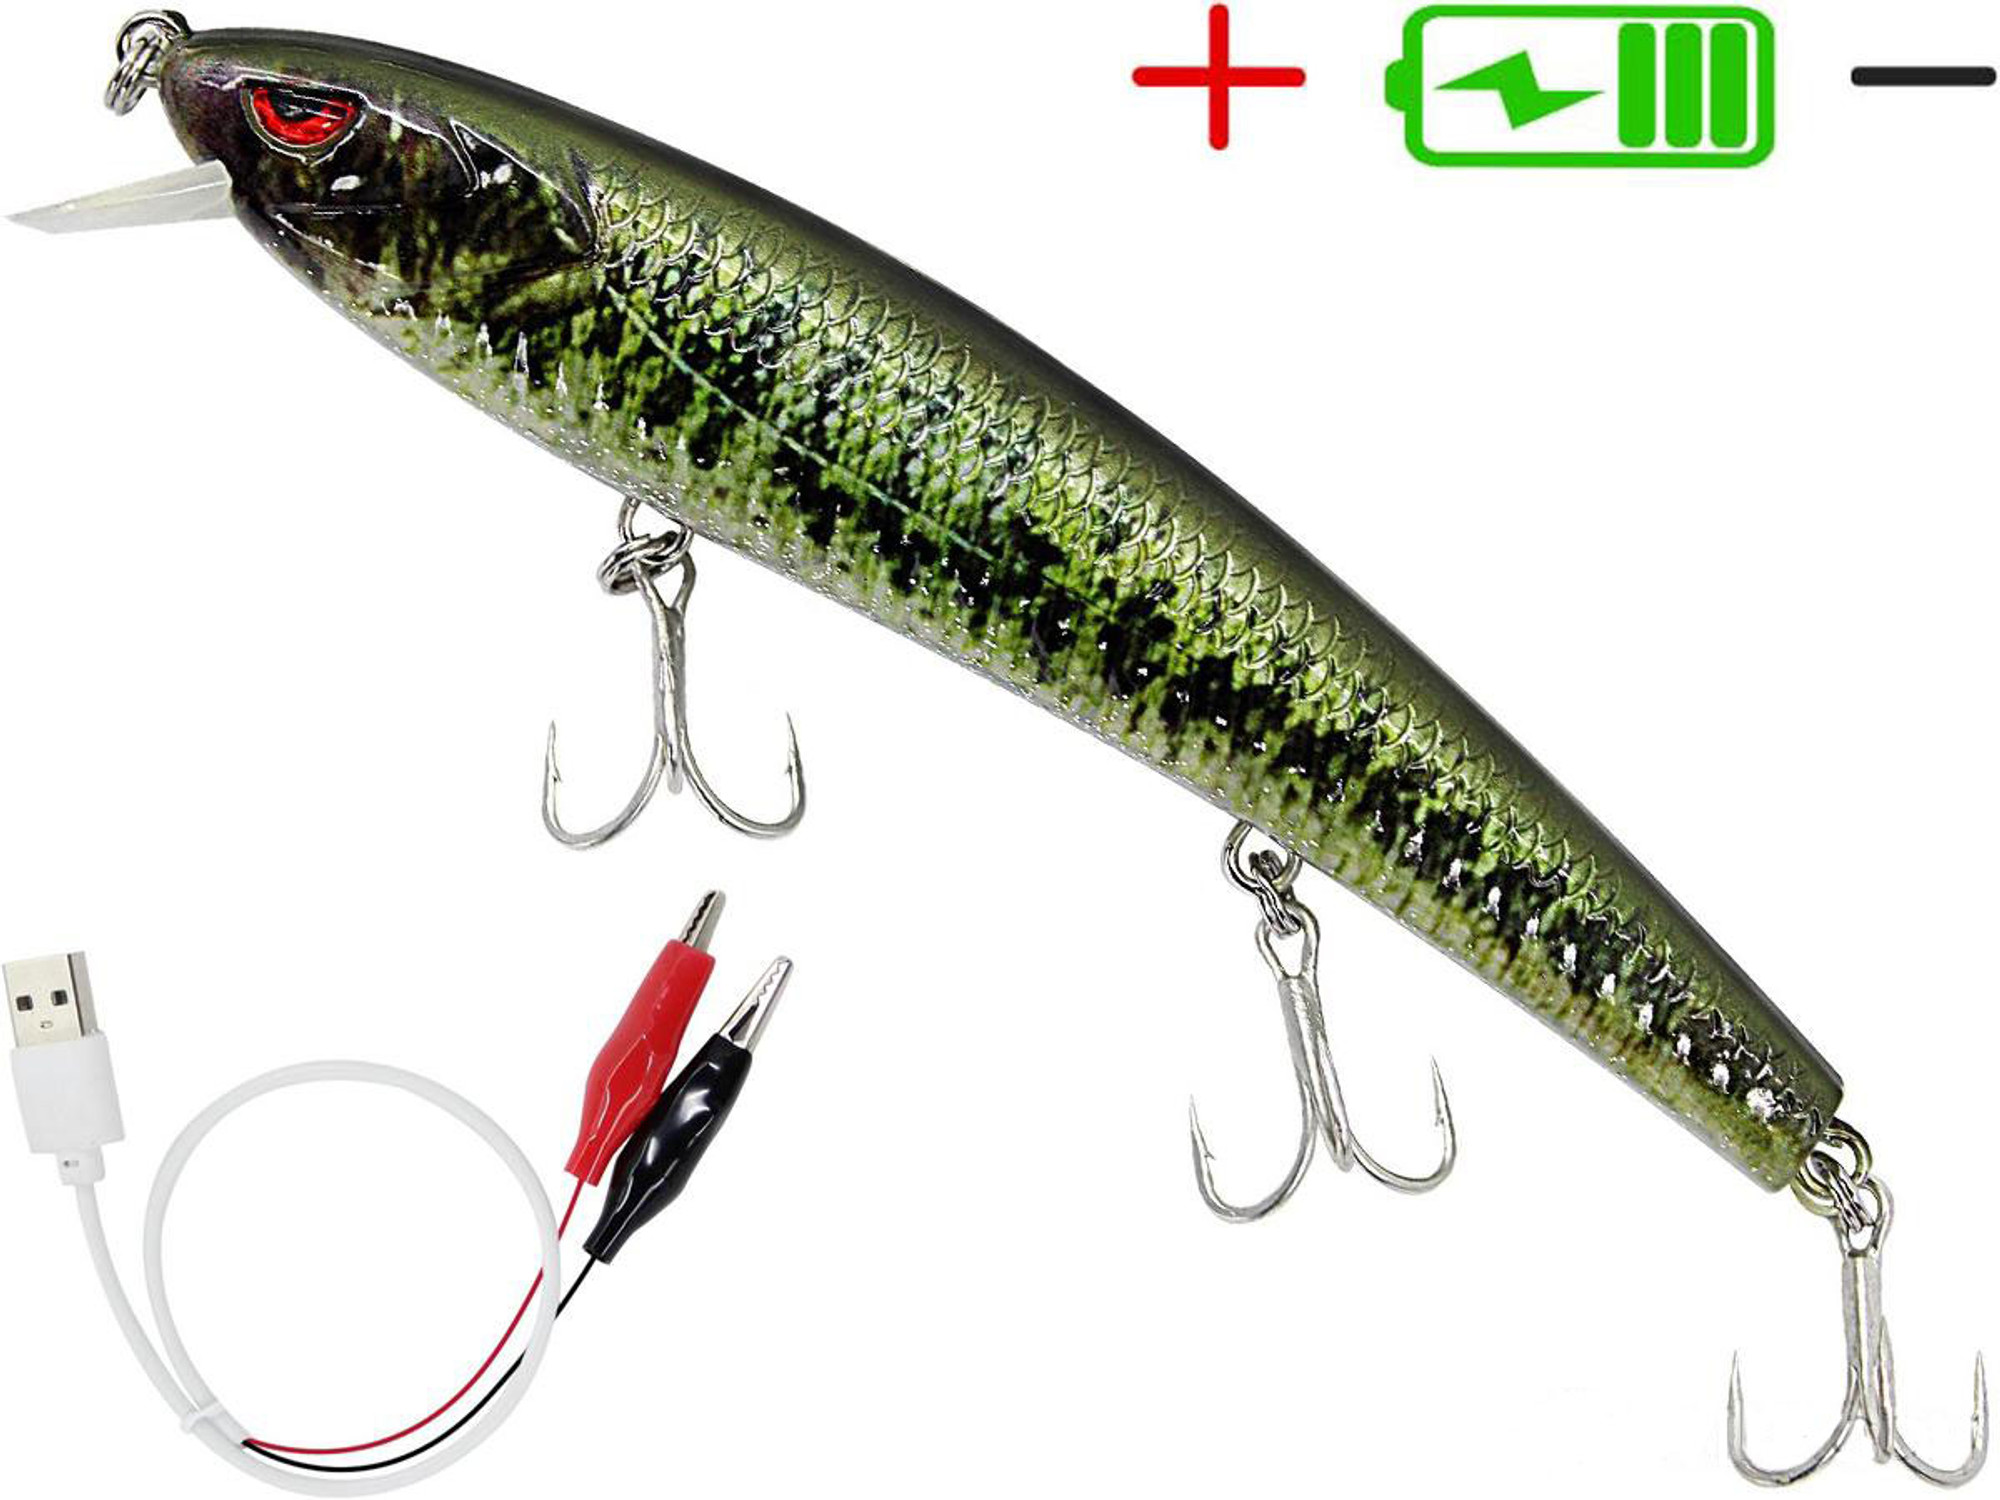 Truscend JerkQueen Electronic Twitching / Luminating Sinking Minnow Lure (Model: Sexy Bass)